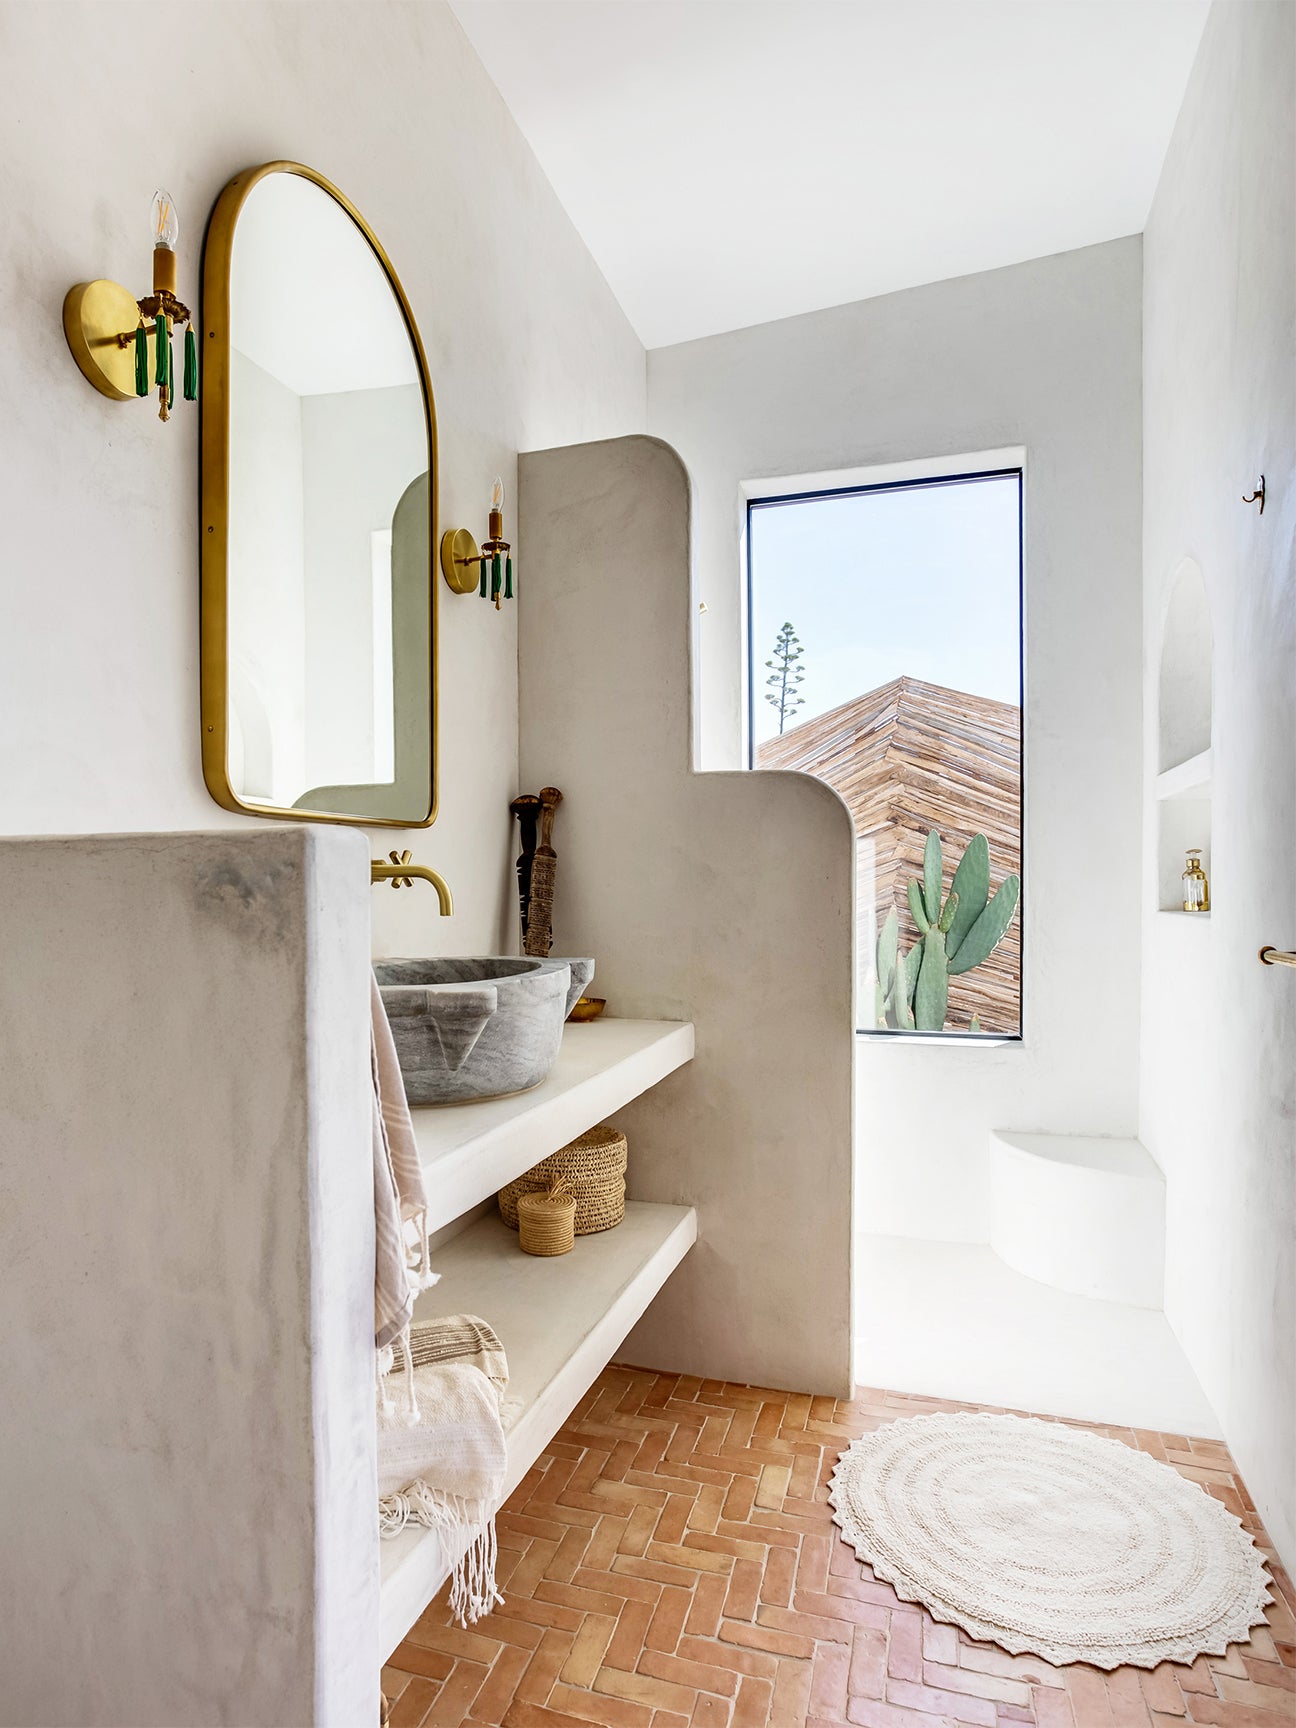 Bathroom with plaster walls and brass fixtures